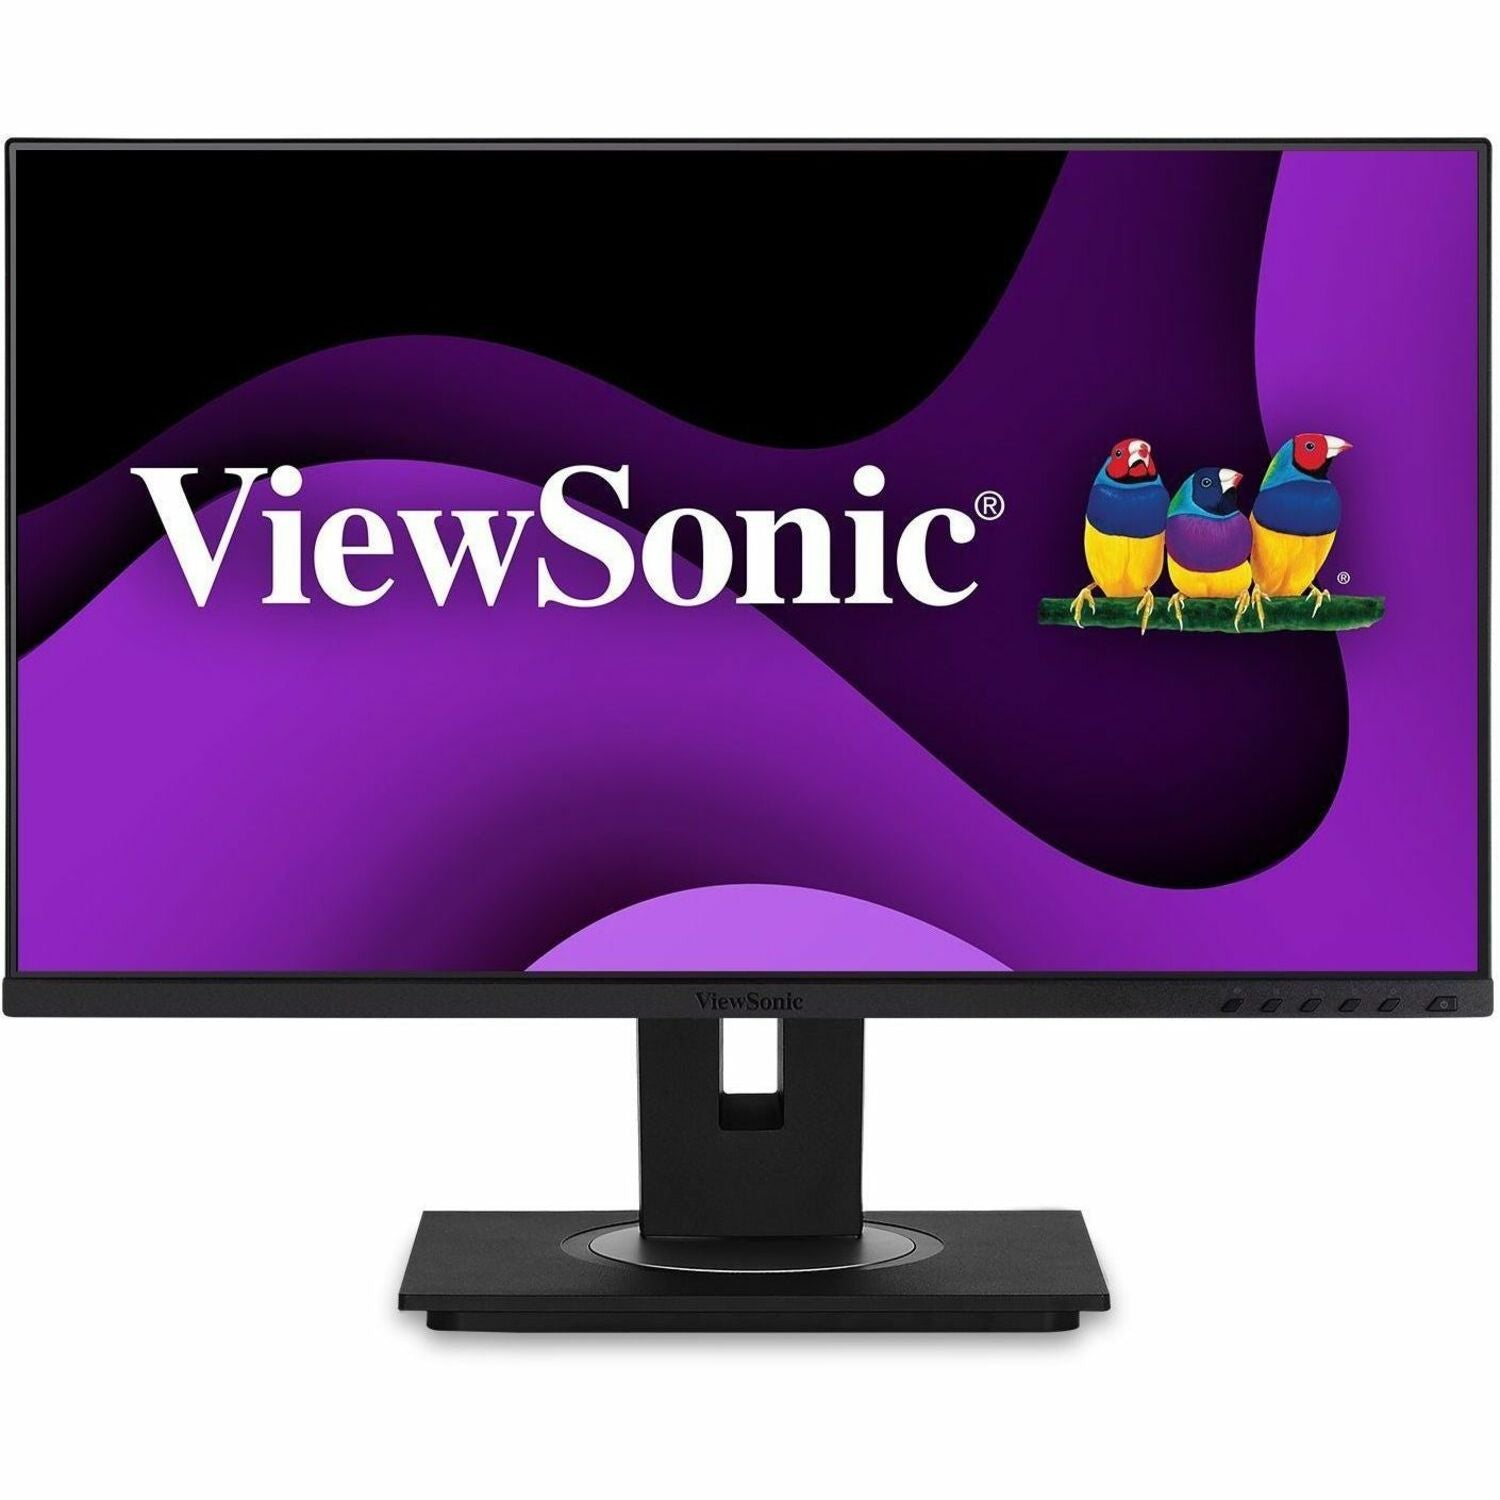 ViewSonic VG245 24 Inch IPS 1080p Monitor Designed for Surface with advanced ergonomics, 60W USB C, HDMI and DisplayPort inputs for Home and Office - VG245